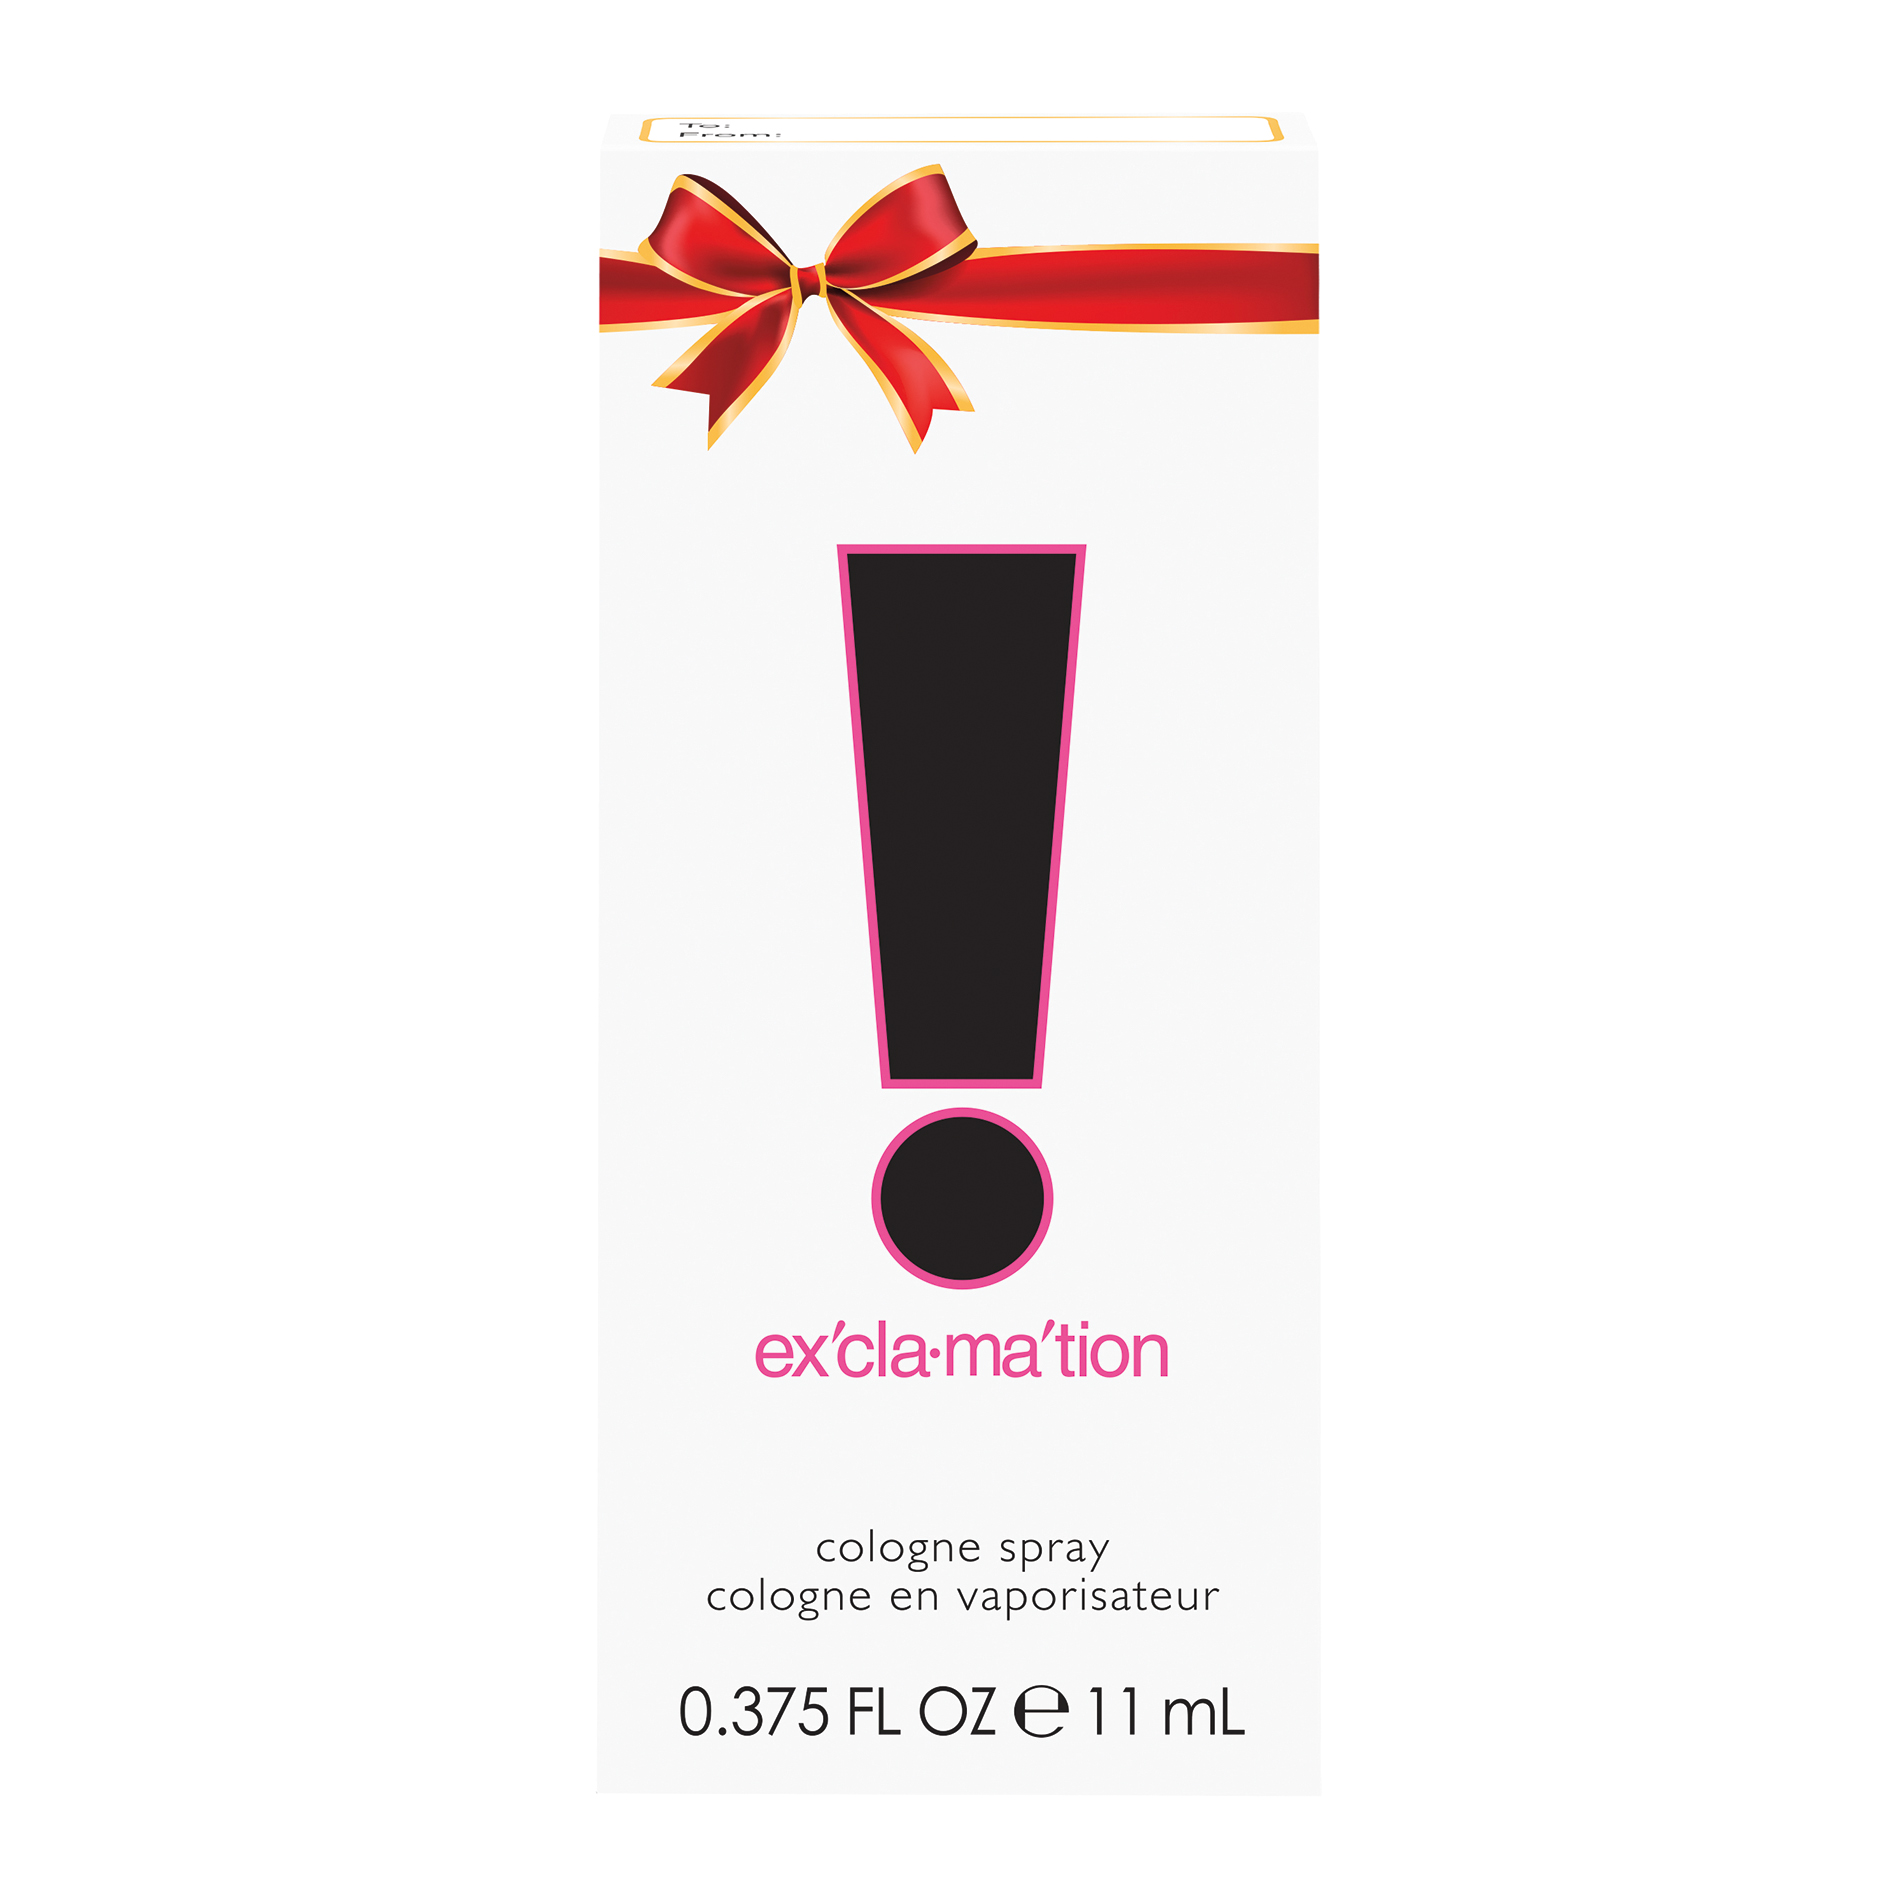 Exclamation Stocking Stuffer Cologne Spray - 0.375 Fl. Oz.